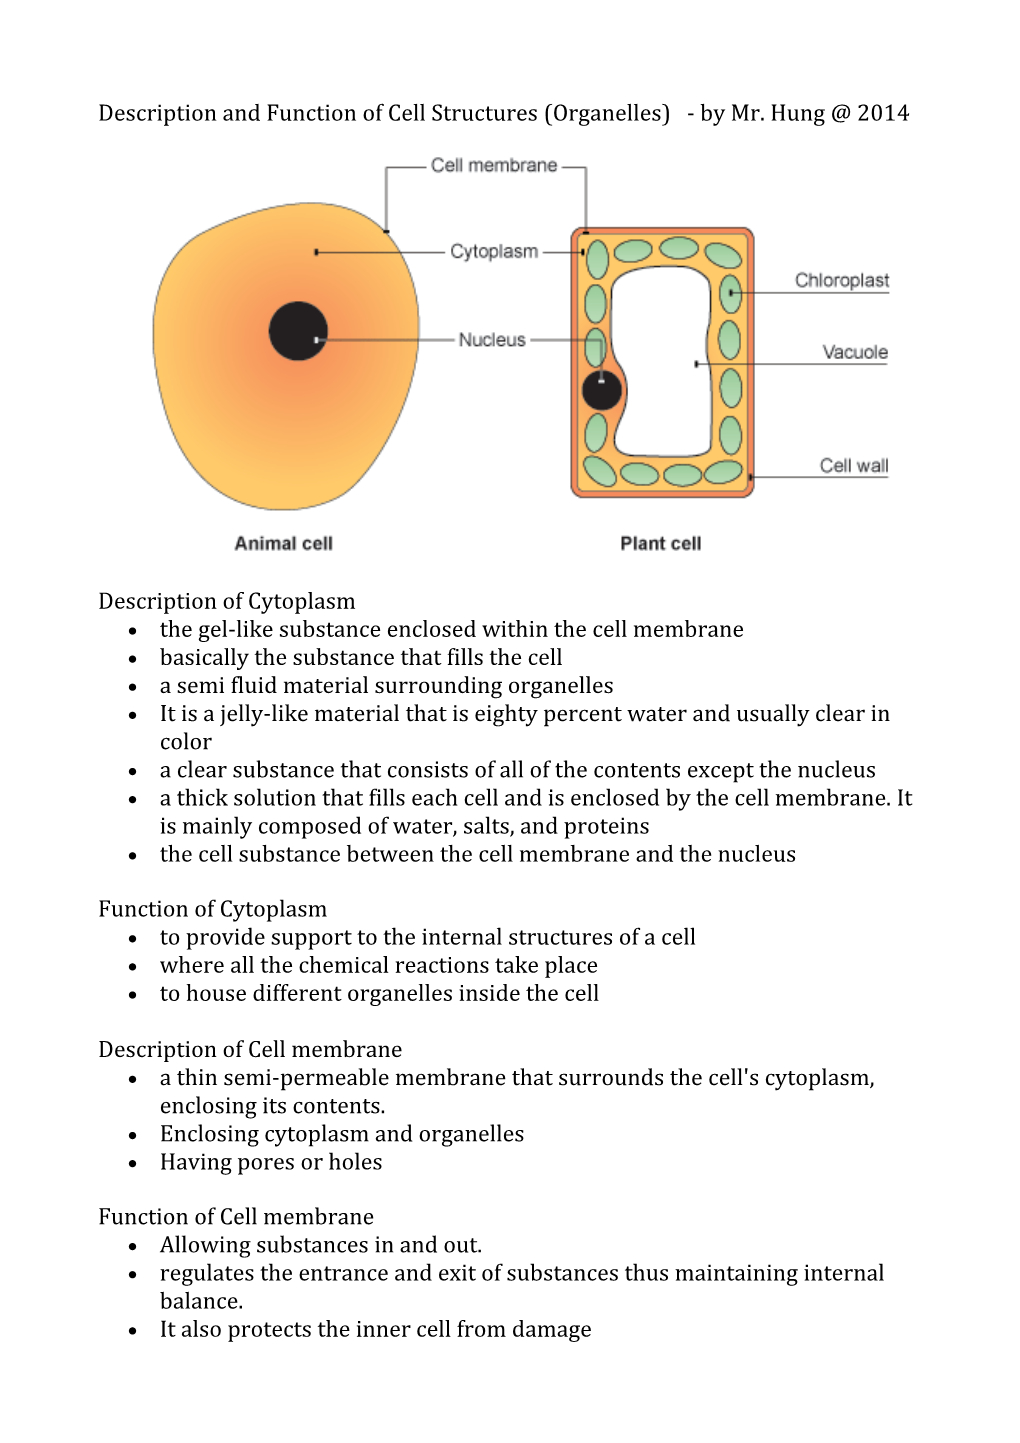 Description and Function of Cell Structures (Organelles) - by Mr. Hung 2014